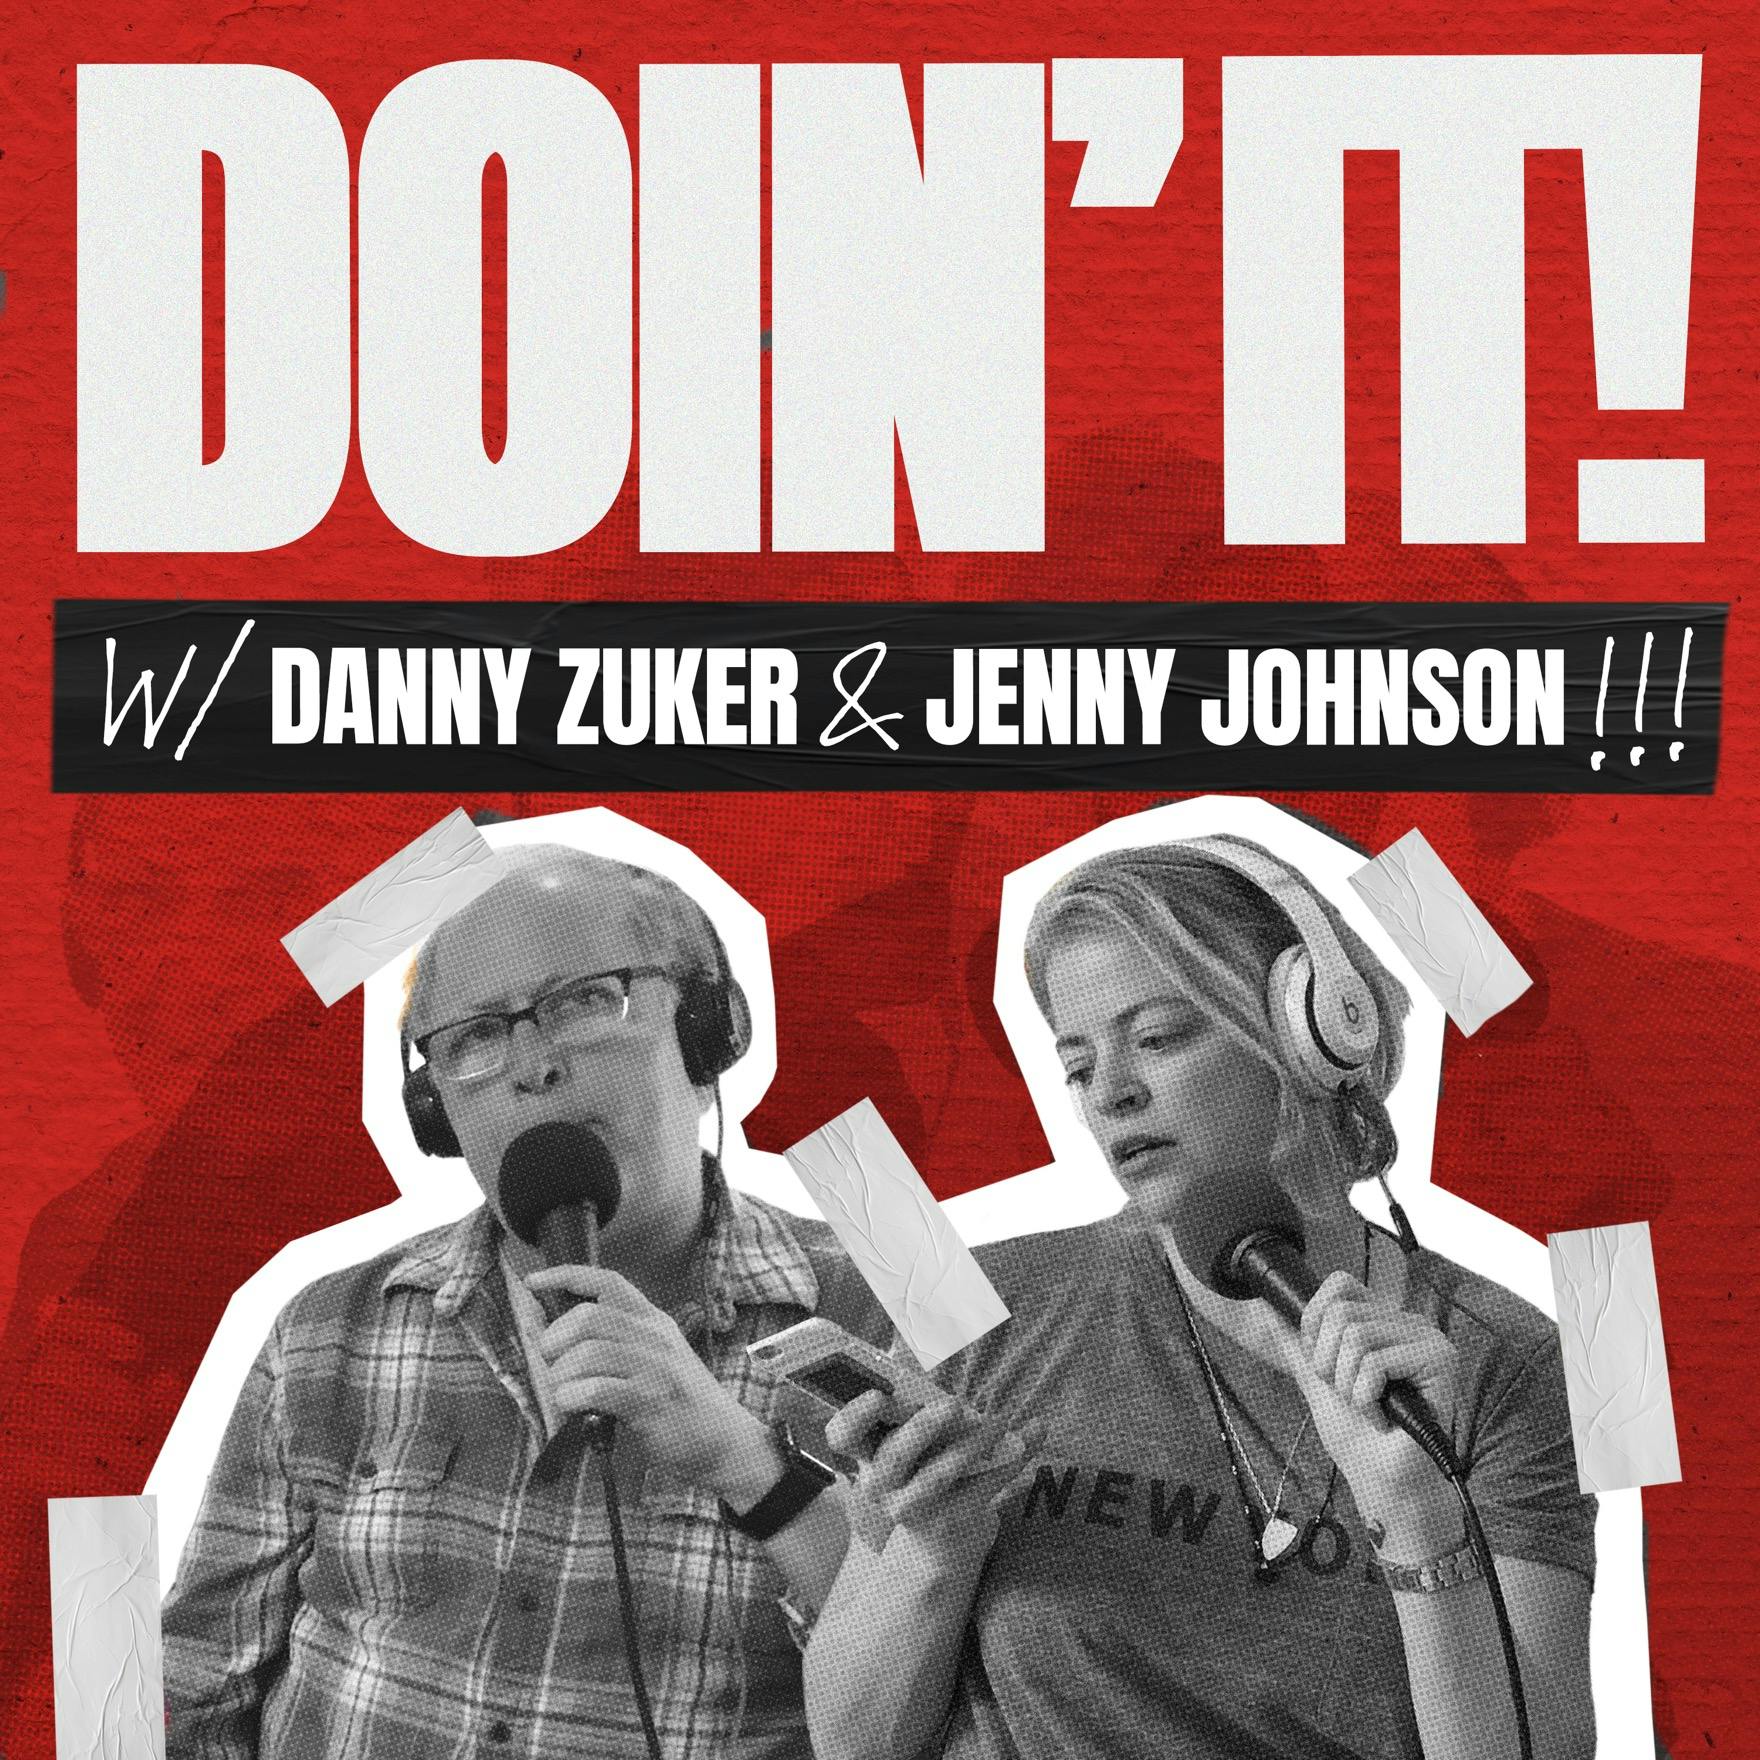 Best of Doin’ It! with Danny Zuker and Jenny Johnson - Actor/Director Chad Lowe